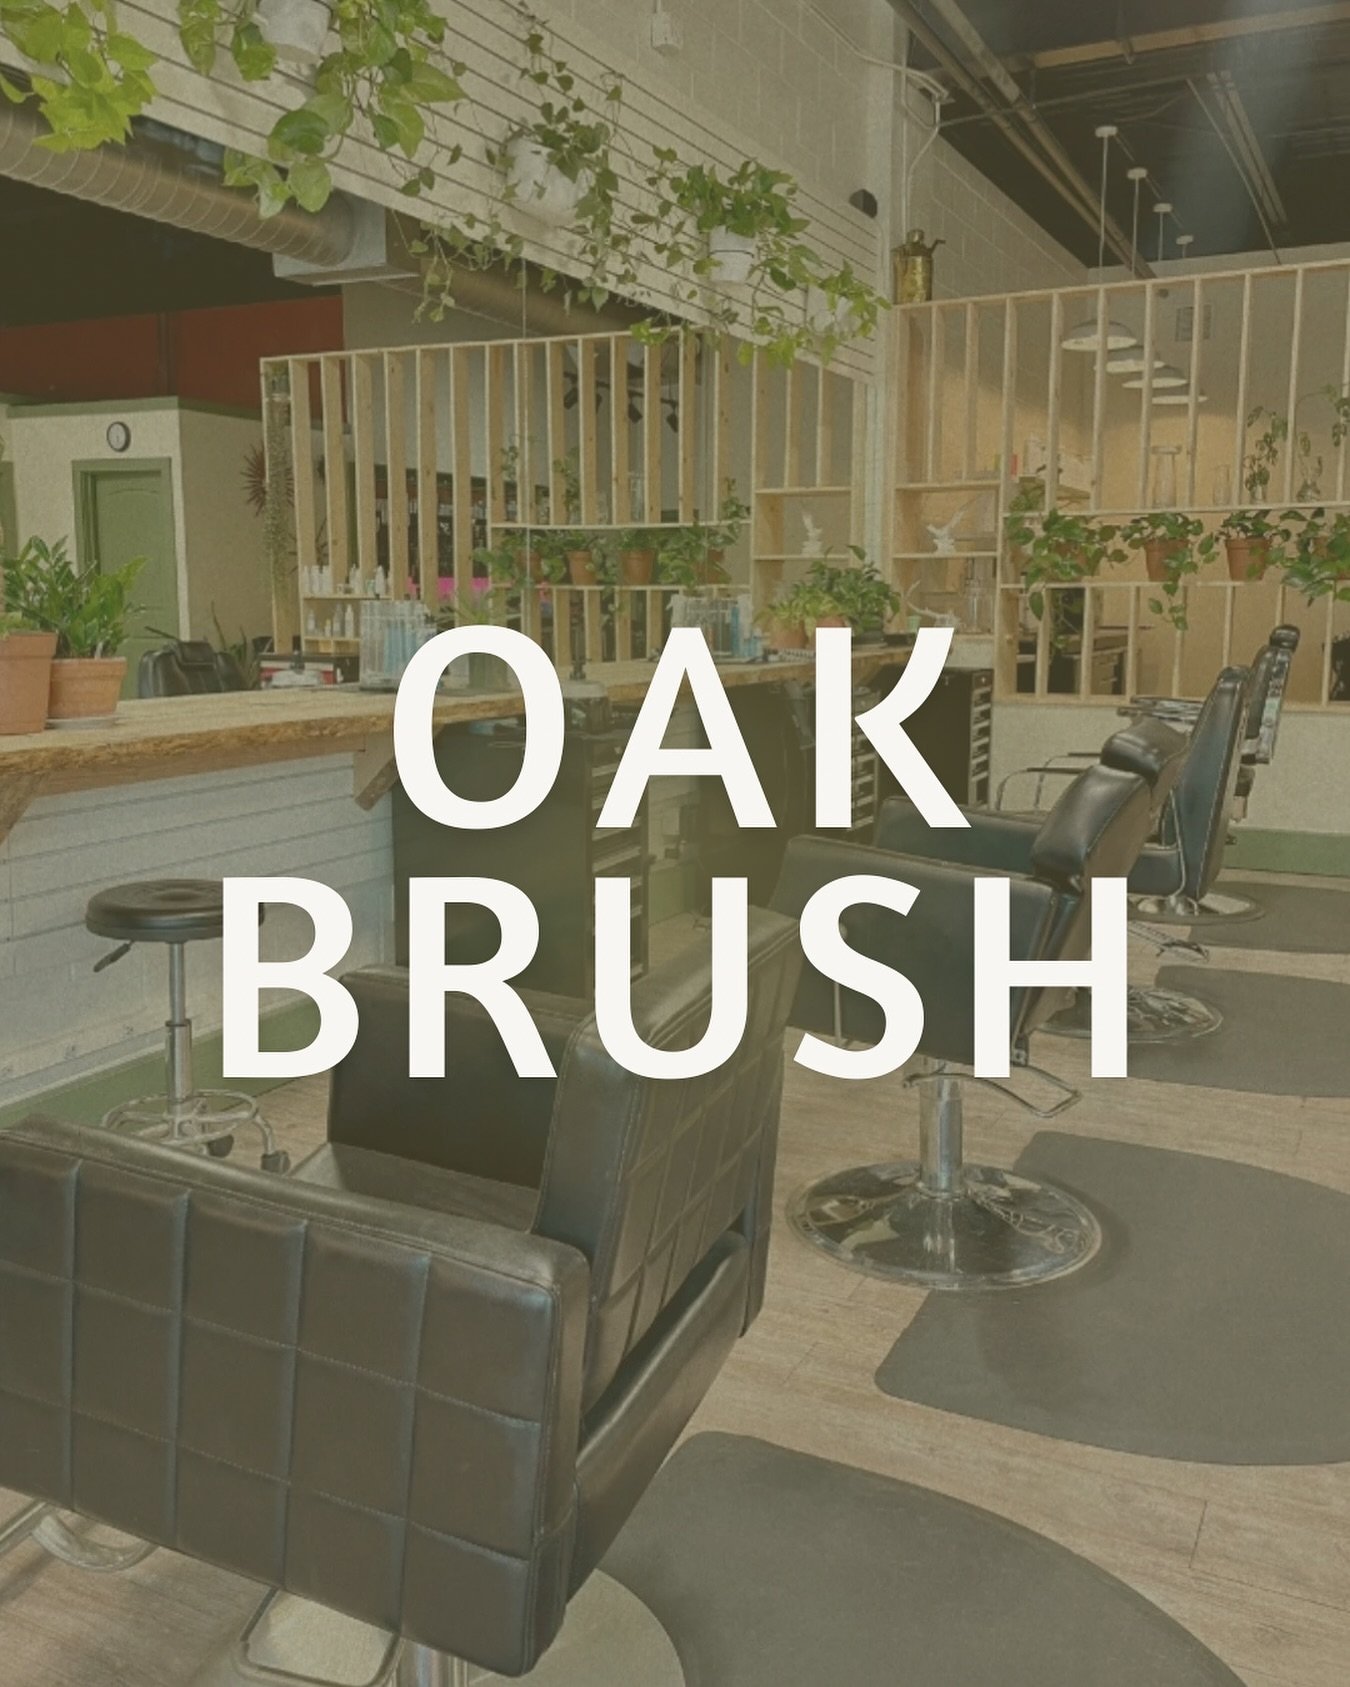 Calling all commission stylists and barbers ~ OAK BRUSH is hiring!

Our mission is to offer curated and elevated salon experiences, where we offer our best service for each client&rsquo;s hair health and goals

We stay busy doing what we love, with h